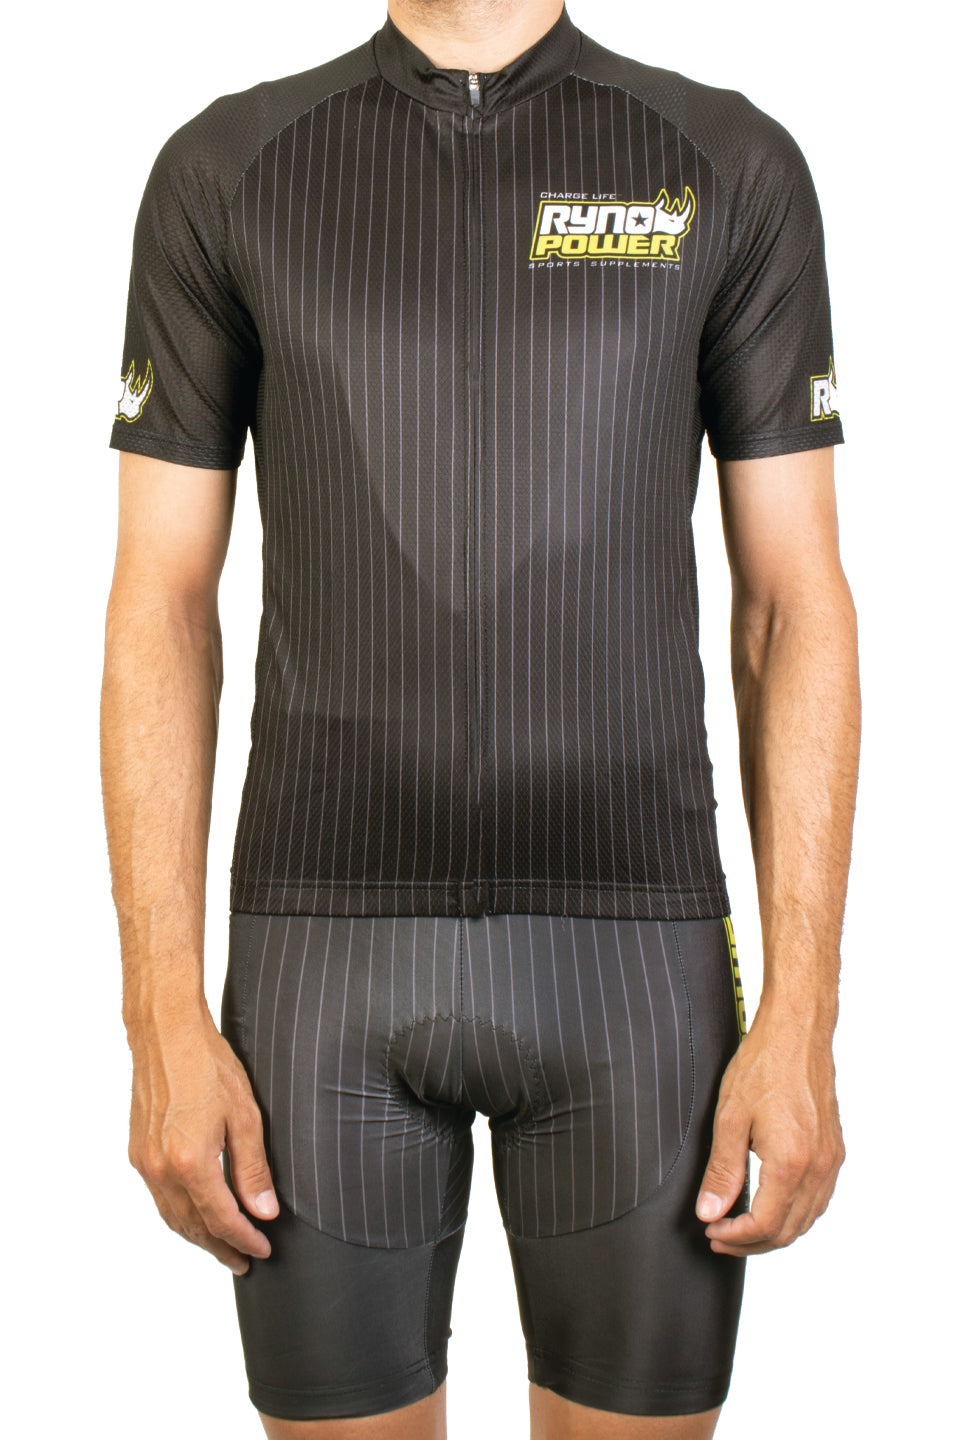 Ryno Power Cycling Kit - Sport edition - Black Pinstripe front